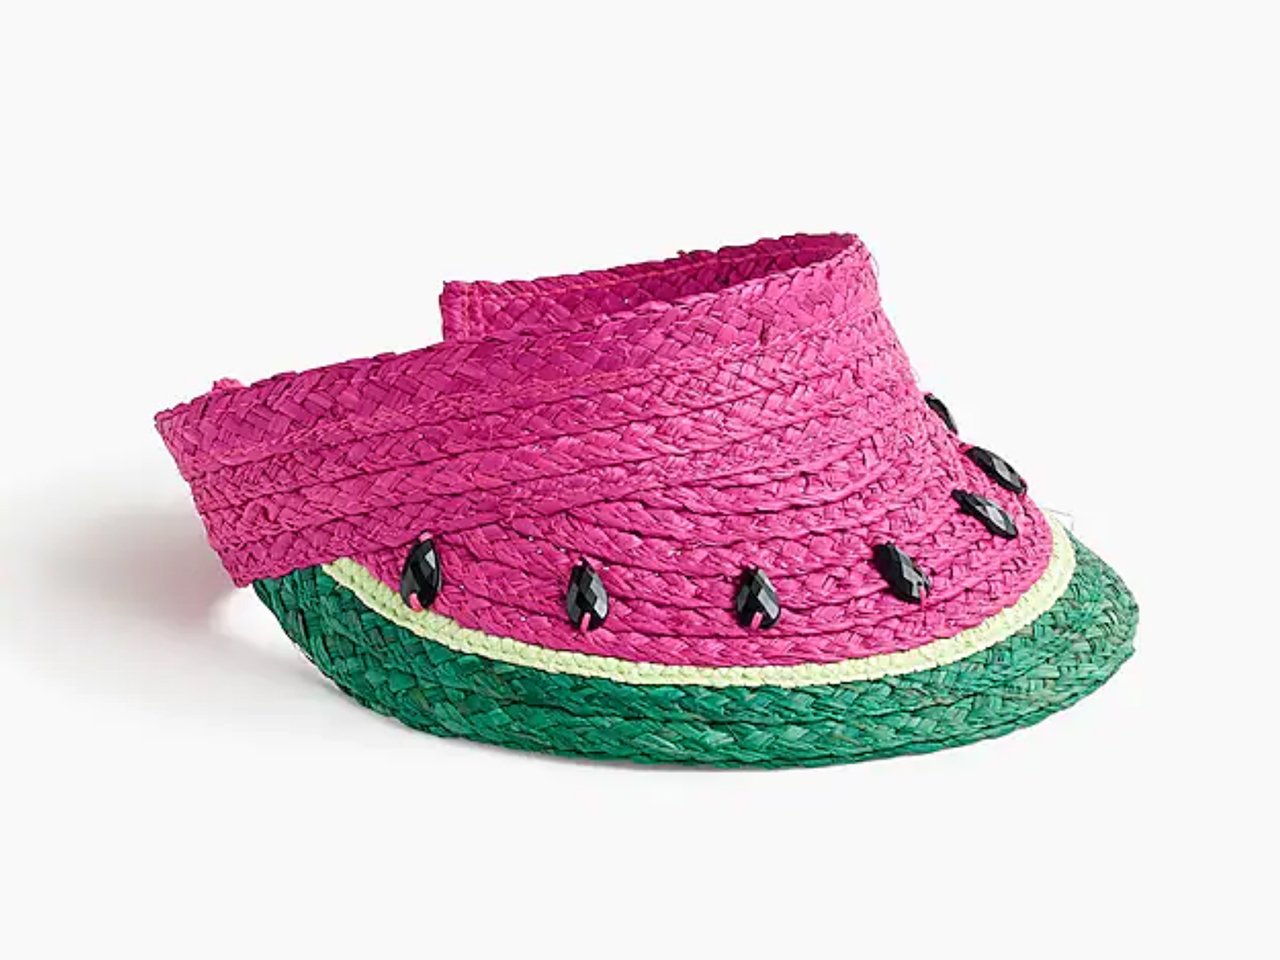 13 summer hats that are cute and will protect them from the sun